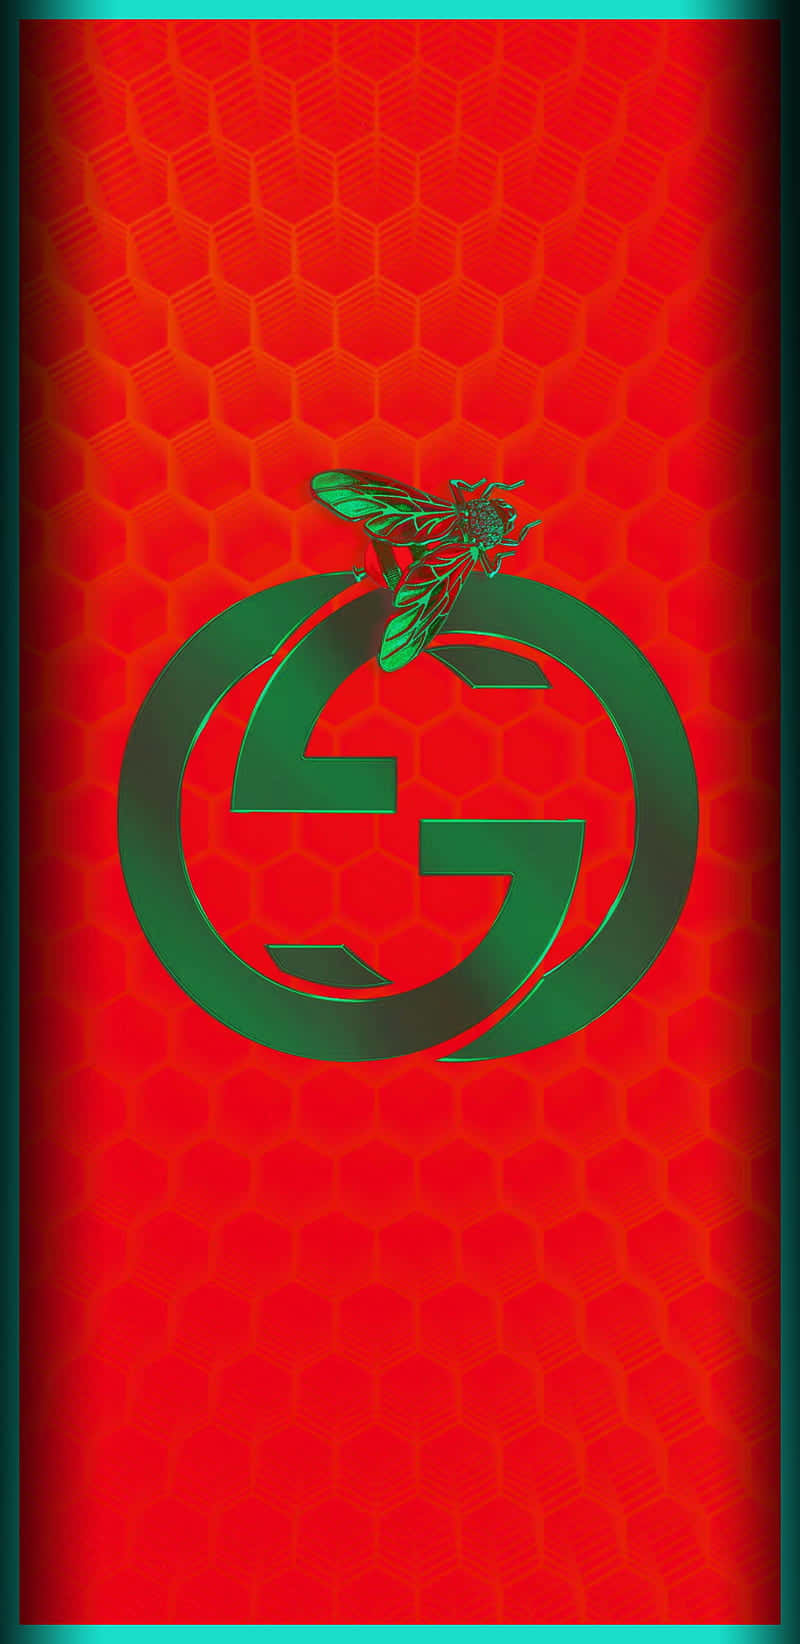 Free Gucci Green Wallpaper Downloads, [100+] Gucci Green Wallpapers for  FREE 